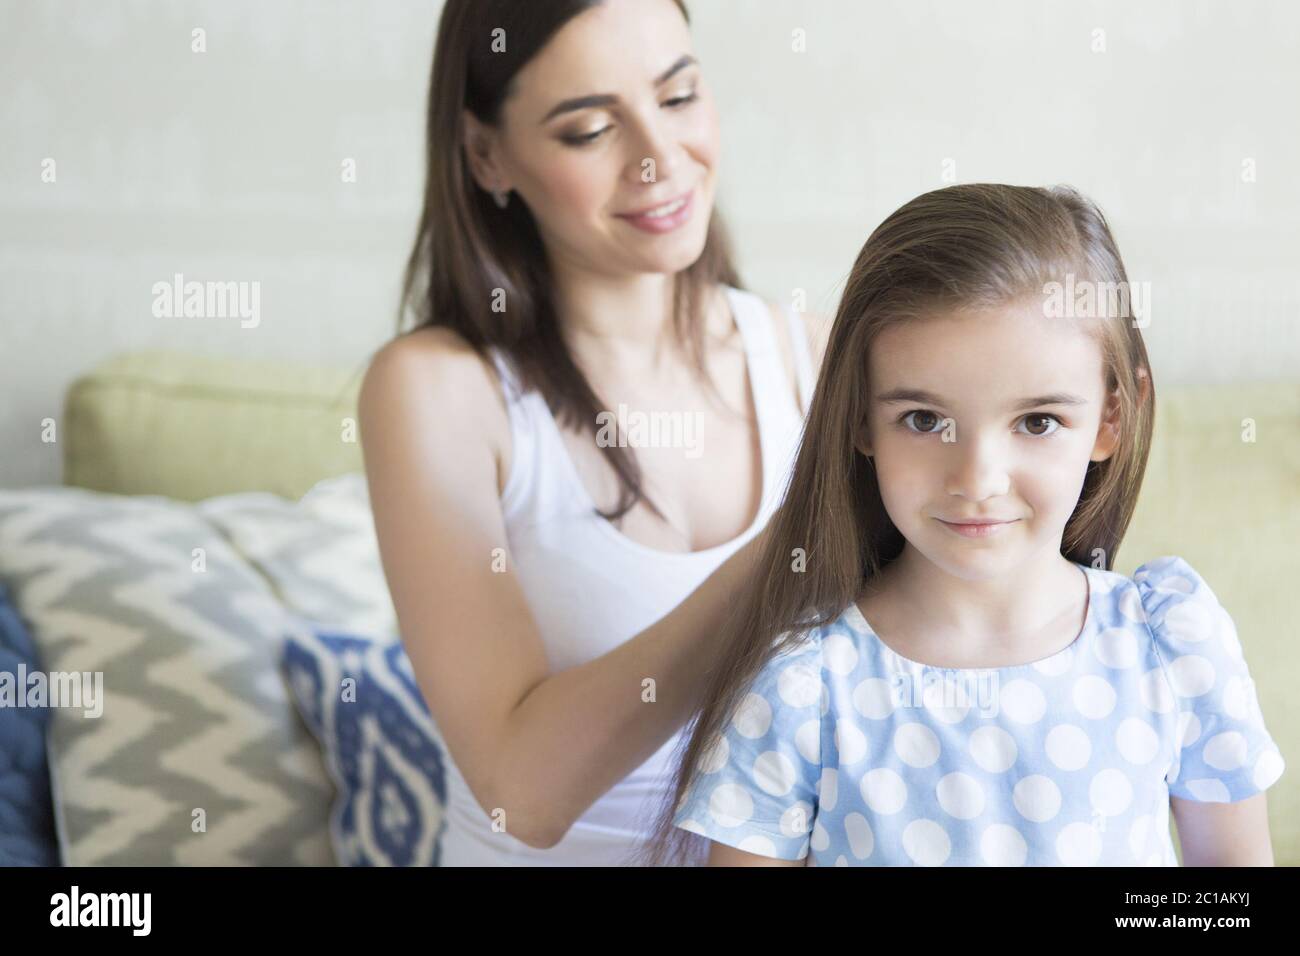 Adorable young family in living room. Mother combing her daughter's hair Stock Photo